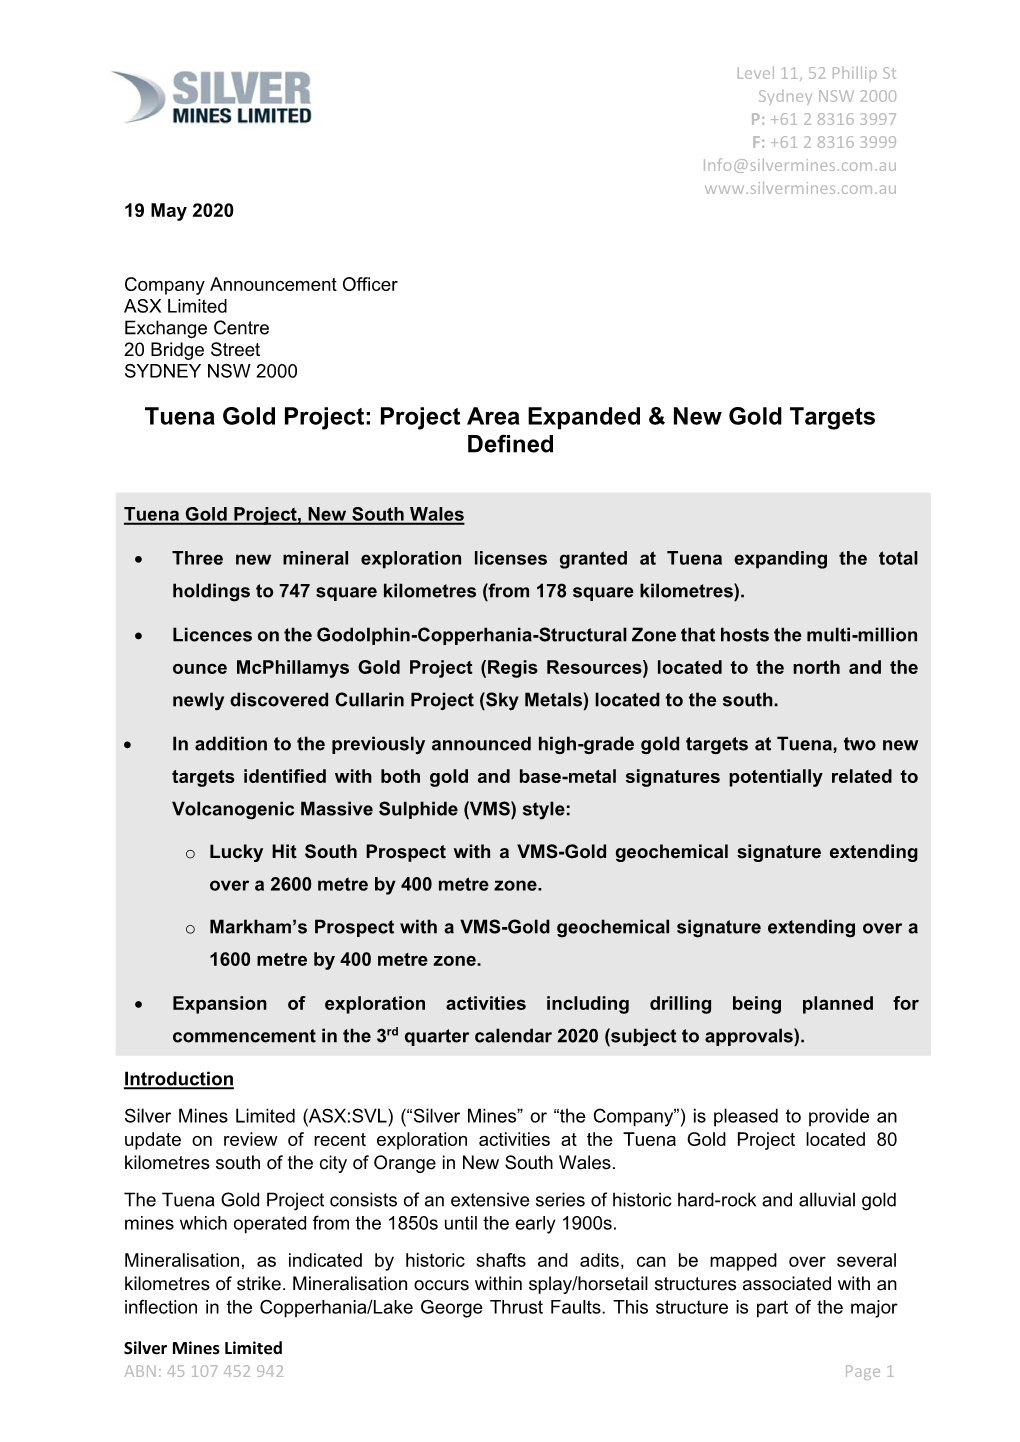 Tuena Gold Project: Project Area Expanded & New Gold Targets Defined